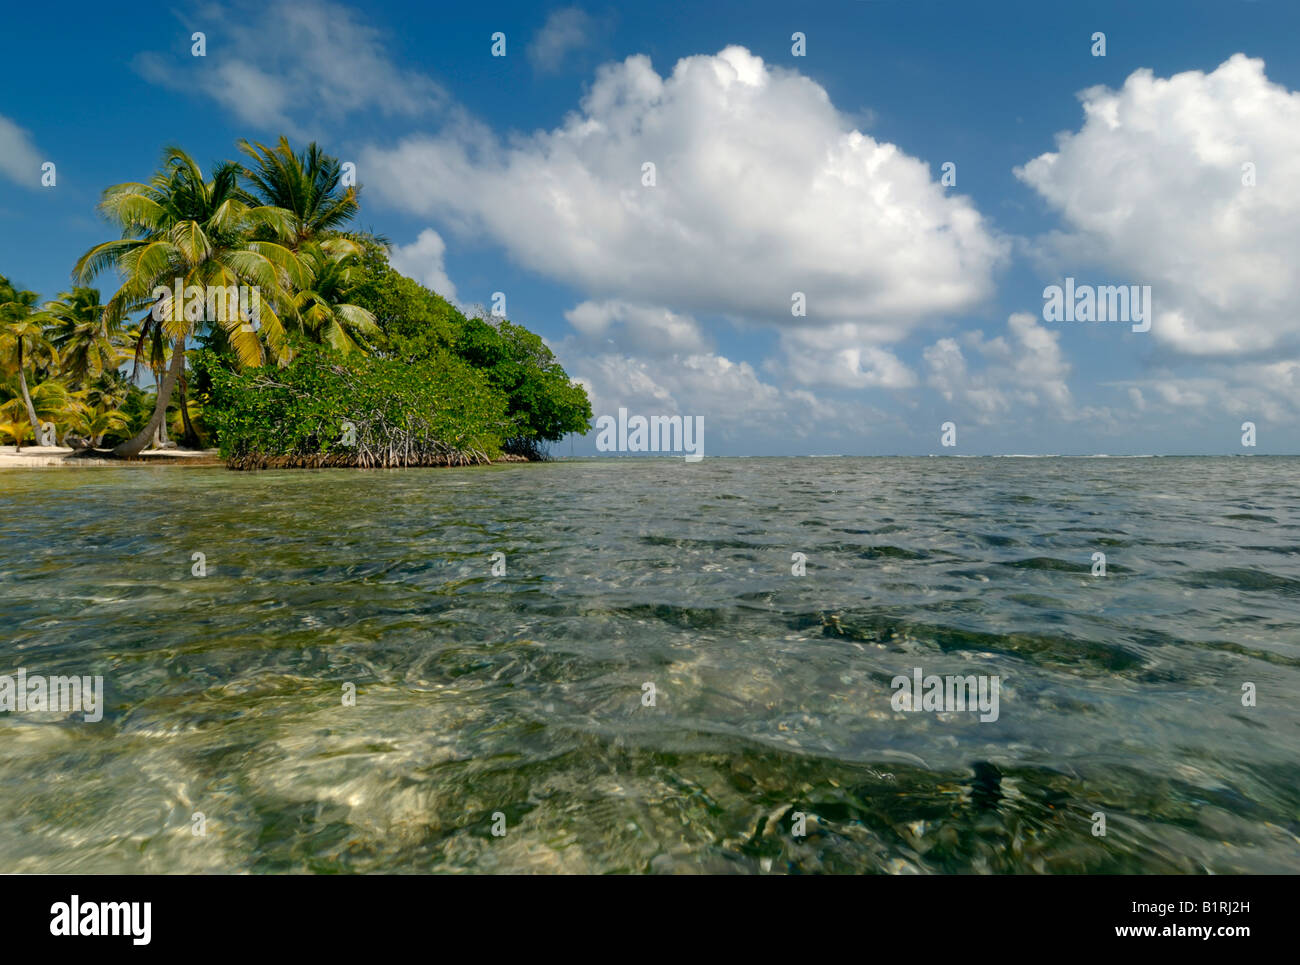 South Water Caye, coral island, Belize Barrier Reef, Caribbean, Central America Stock Photo